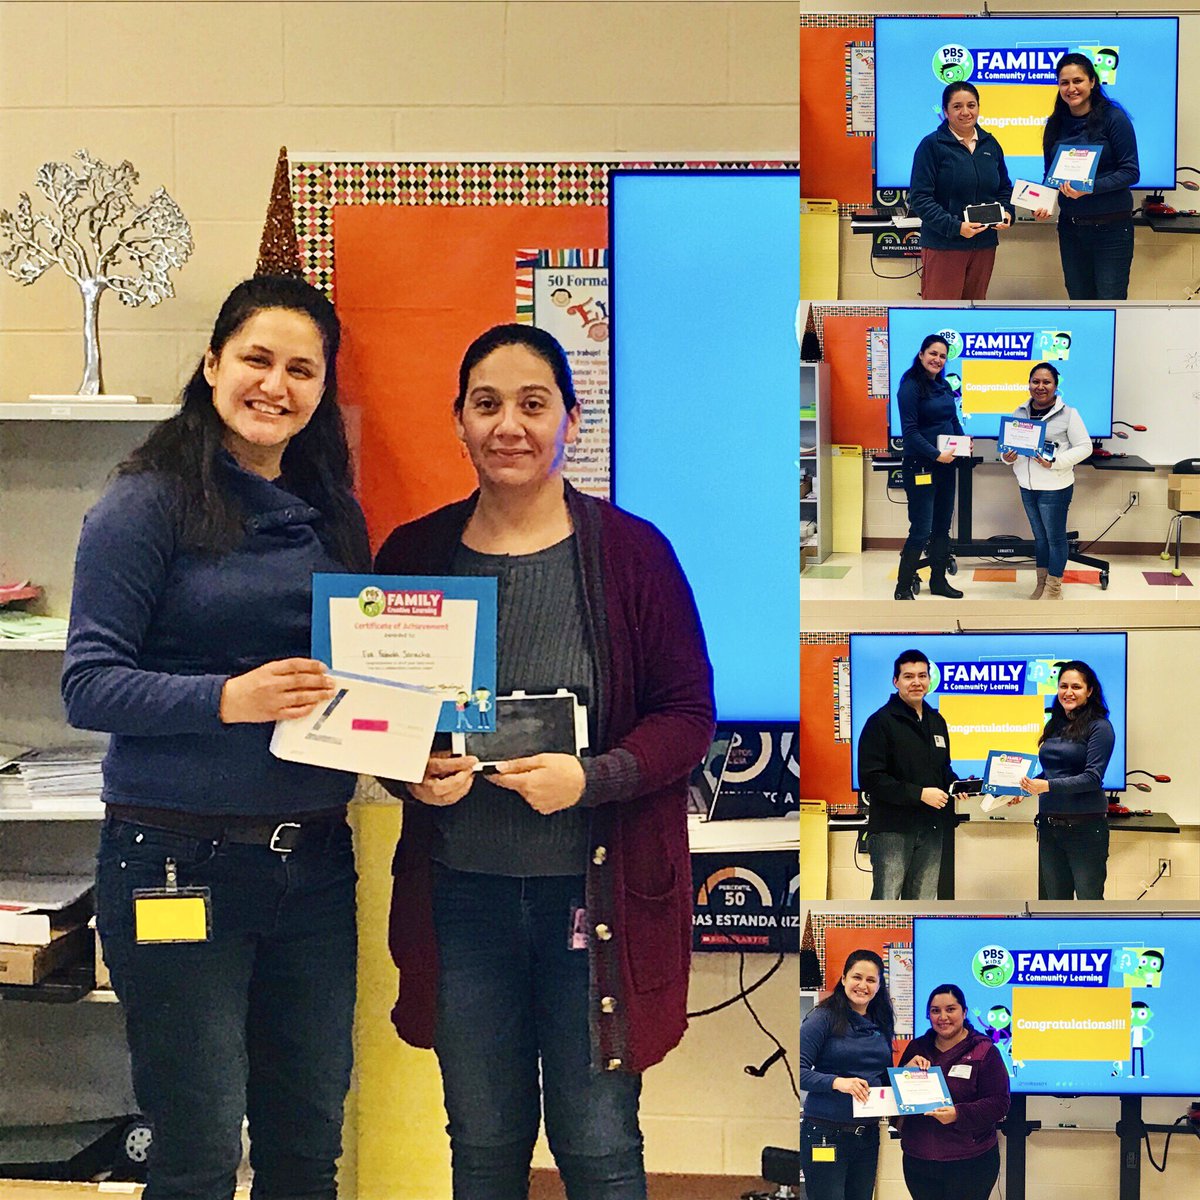 Thank you @austinpbs Miriam, we had an amazing Tchr teach our @GTGrizzlyBears parents about coding, today we had a mini-celebration for completing their #coding class! #KnowGuerreroThompson #AISDProud #GrizzlyGrit #BeARunner @gtprincipal186 @AISDTech @aisdparents  @FamAsPartners